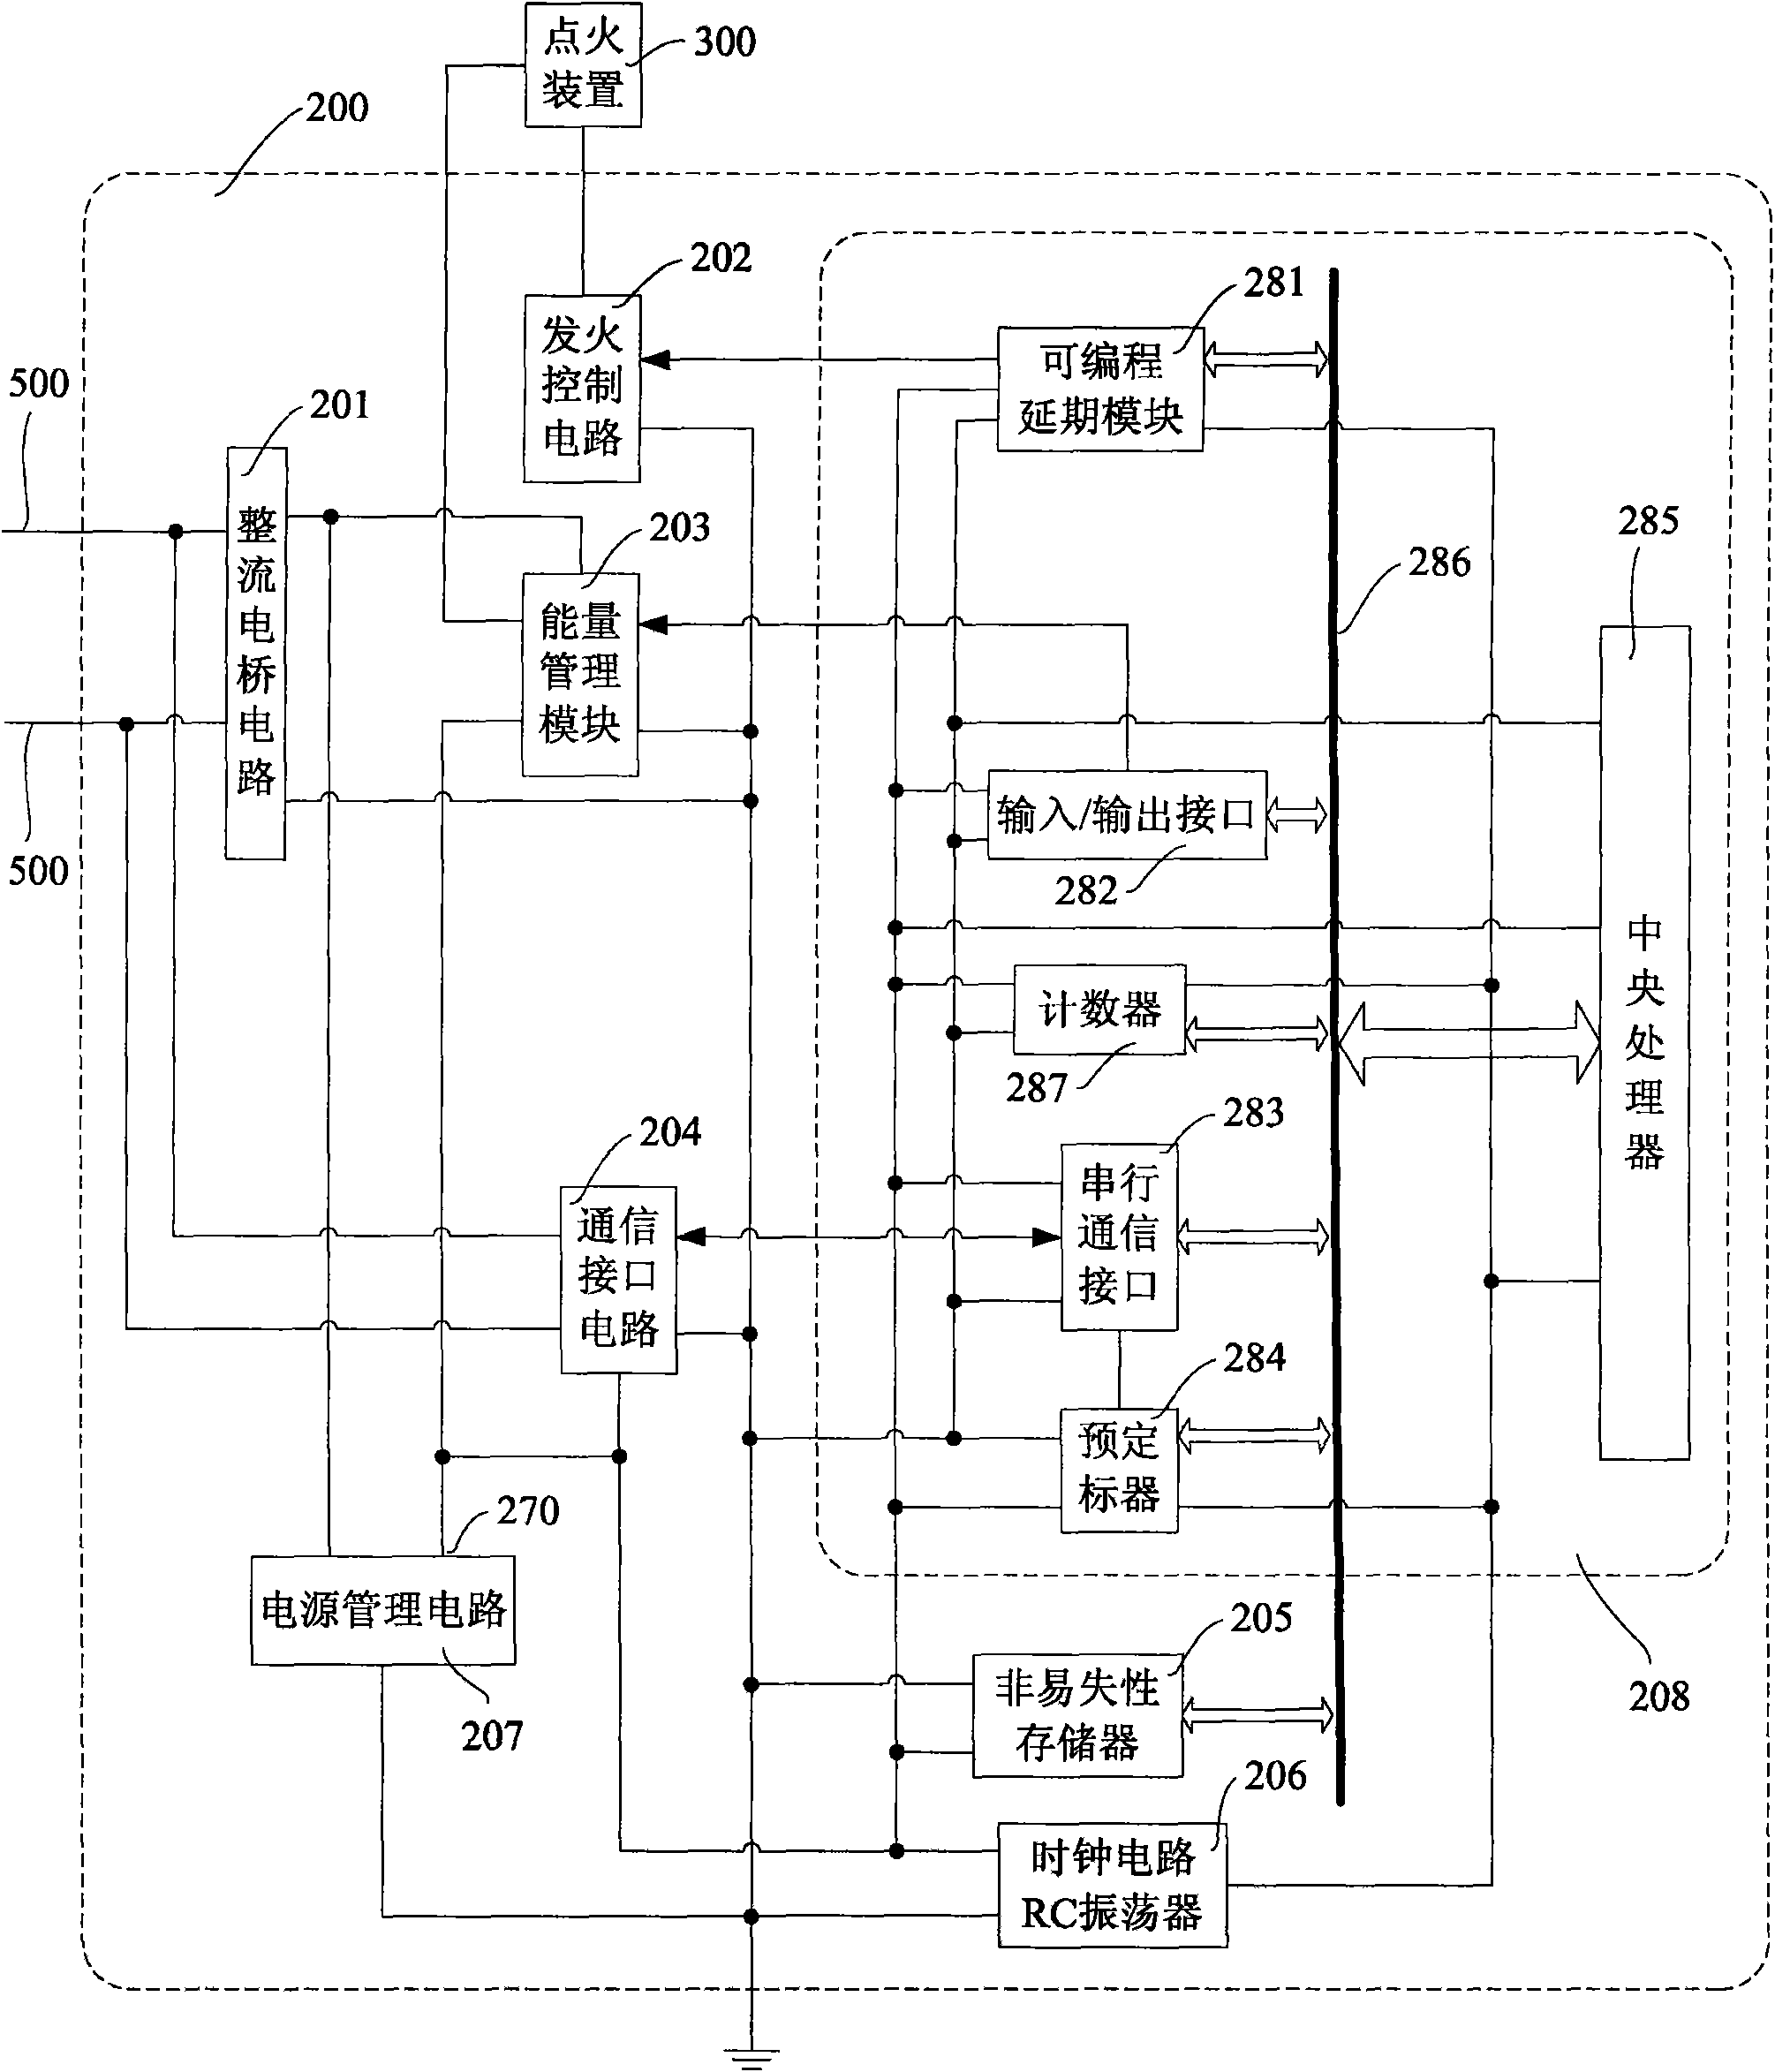 Adjustable electronic detonator control chip and flow for controlling same